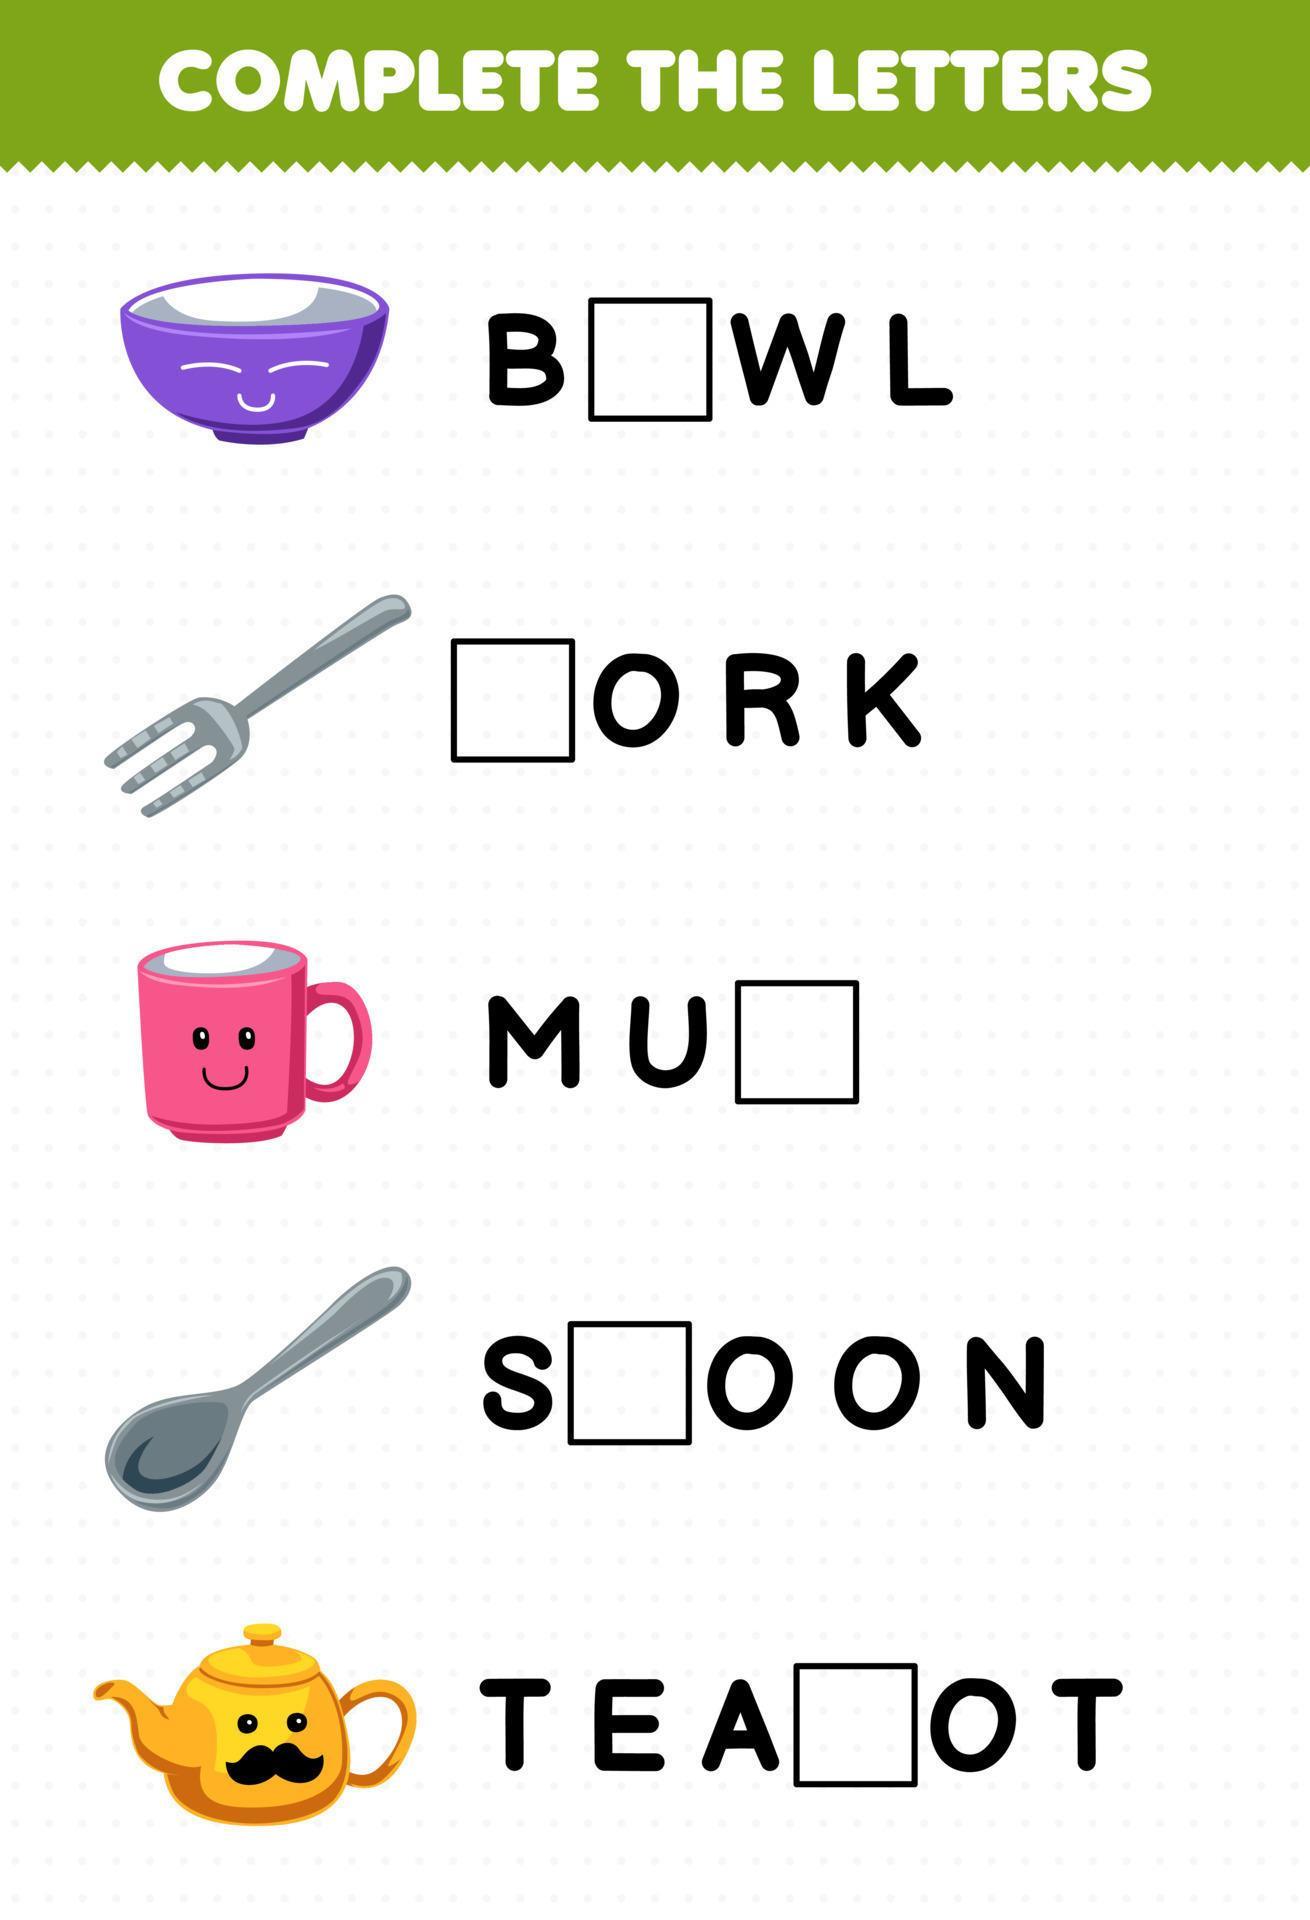 education-game-for-children-complete-the-letters-from-cute-cartoon-bowl-fork-mug-spoon-teapot